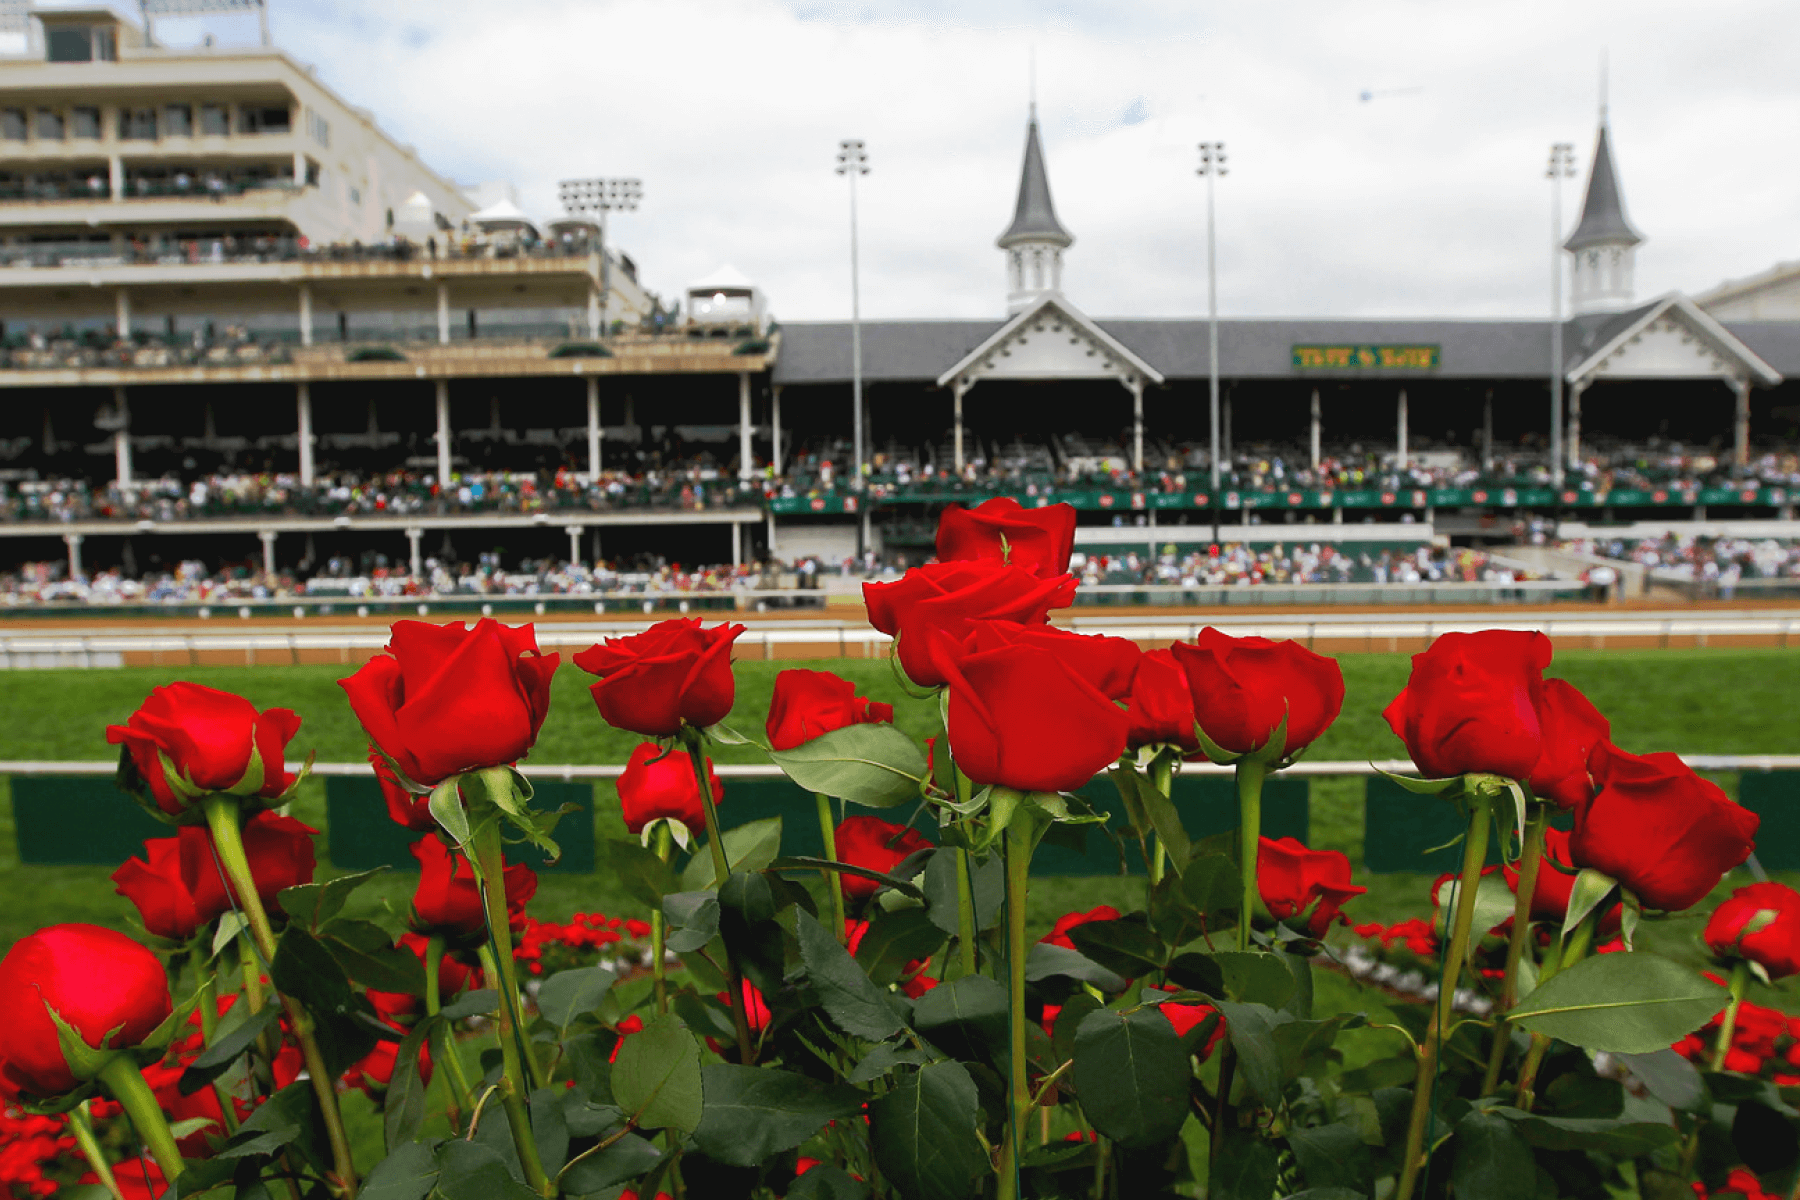 Ultimate Kentucky Derby Party Ideas for a Fabulous Race Day Event